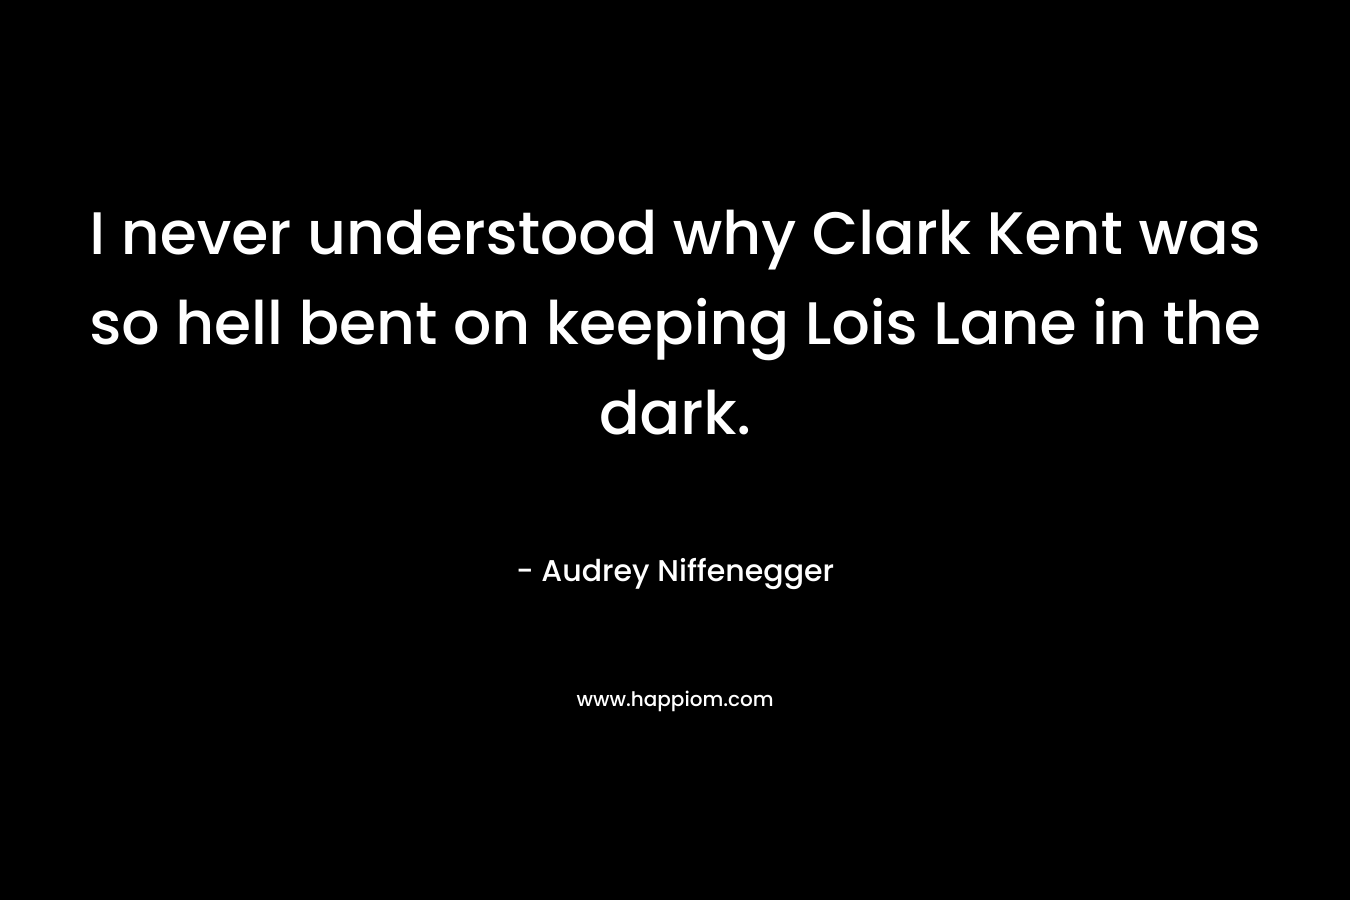 I never understood why Clark Kent was so hell bent on keeping Lois Lane in the dark. – Audrey Niffenegger